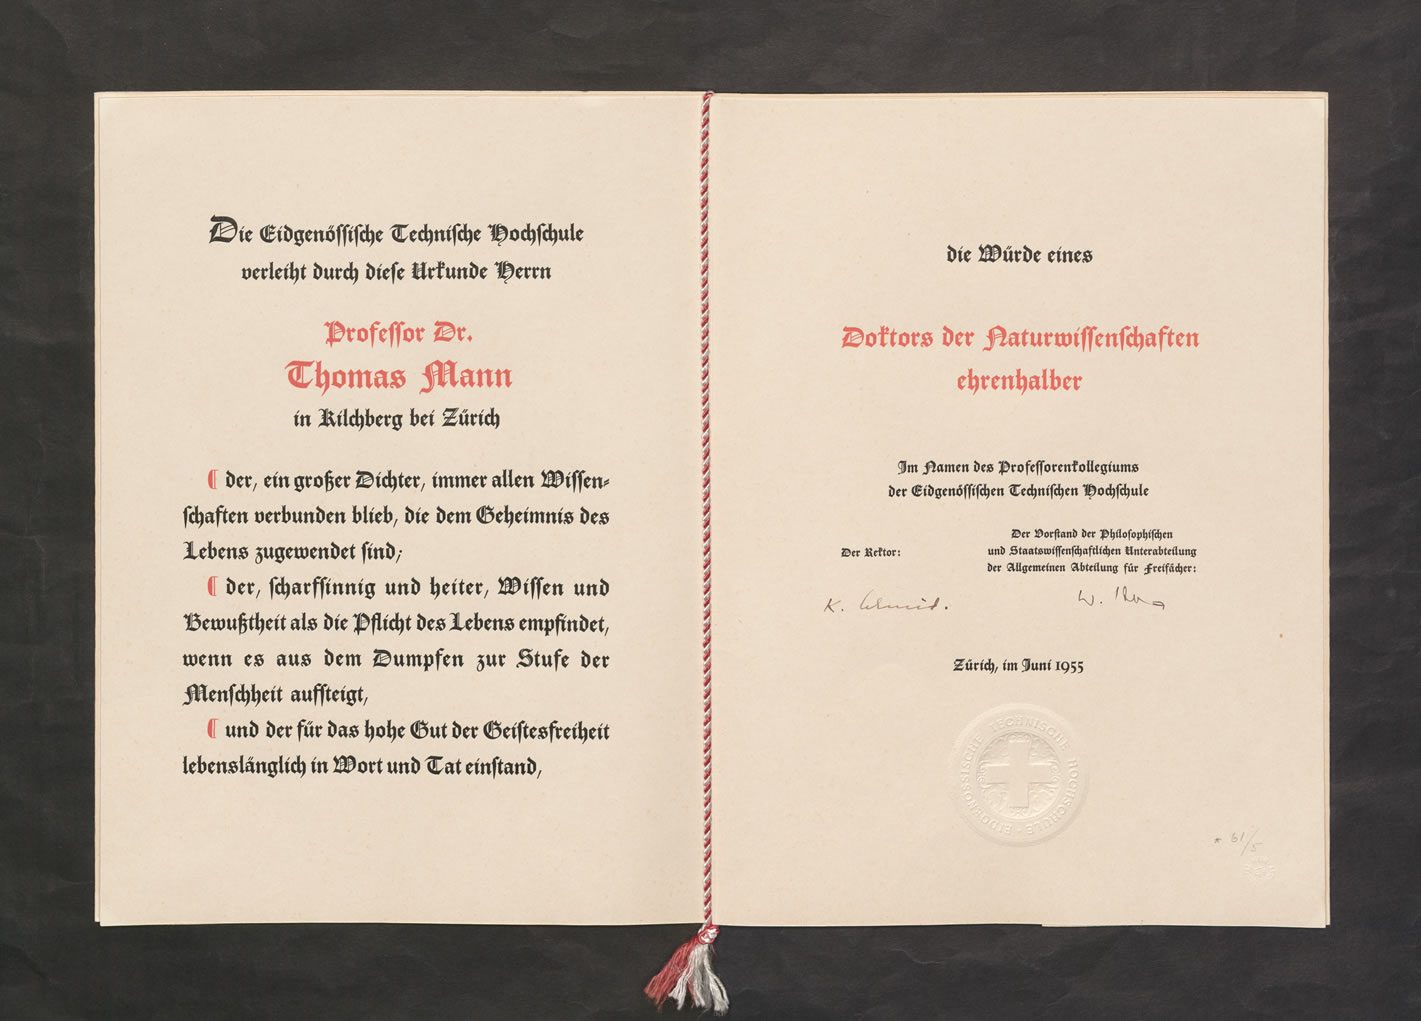 Enlarged view: On part of ETH Zurich, Karl Schmid awarded Thomas Mann an &quot;Honorary Doctorate in Science&quot; to commemorate his eightieth birthday in 1955. Photo: Thomas Mann Archives